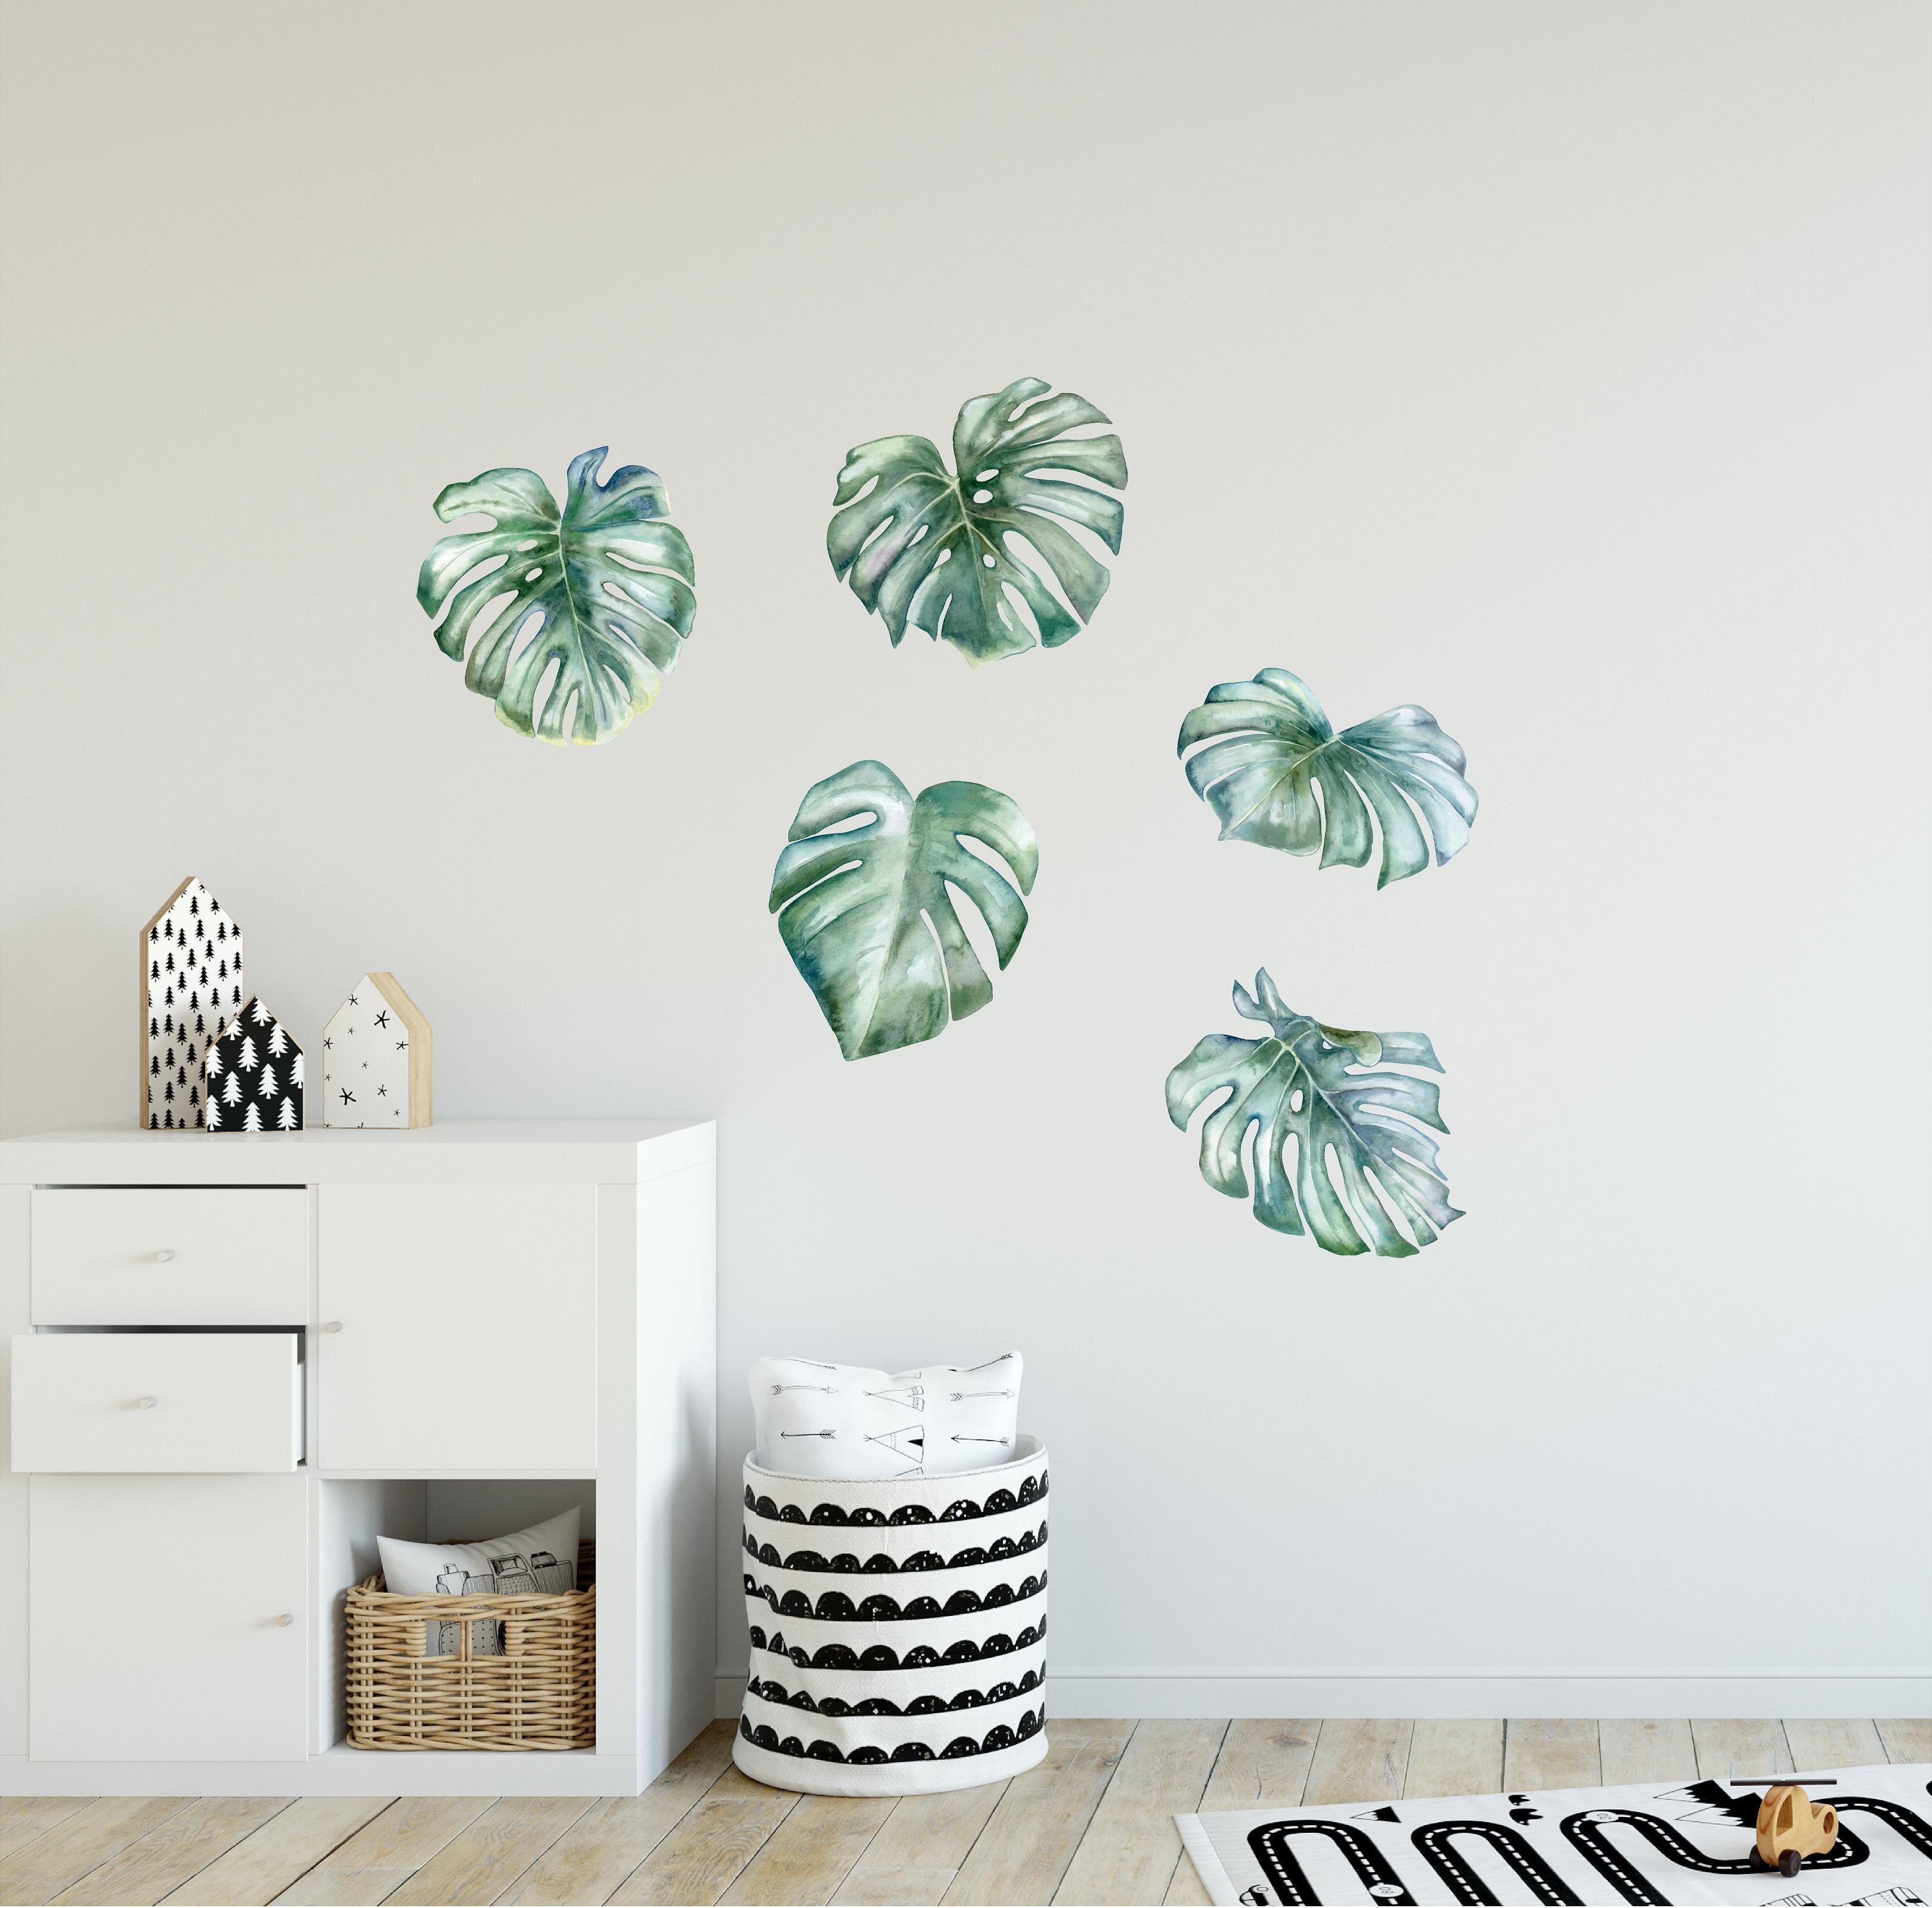 Tropical Monstera Leaves Wall Decal Set #2 Safari Fabric Wall Sticker | DecalBaby